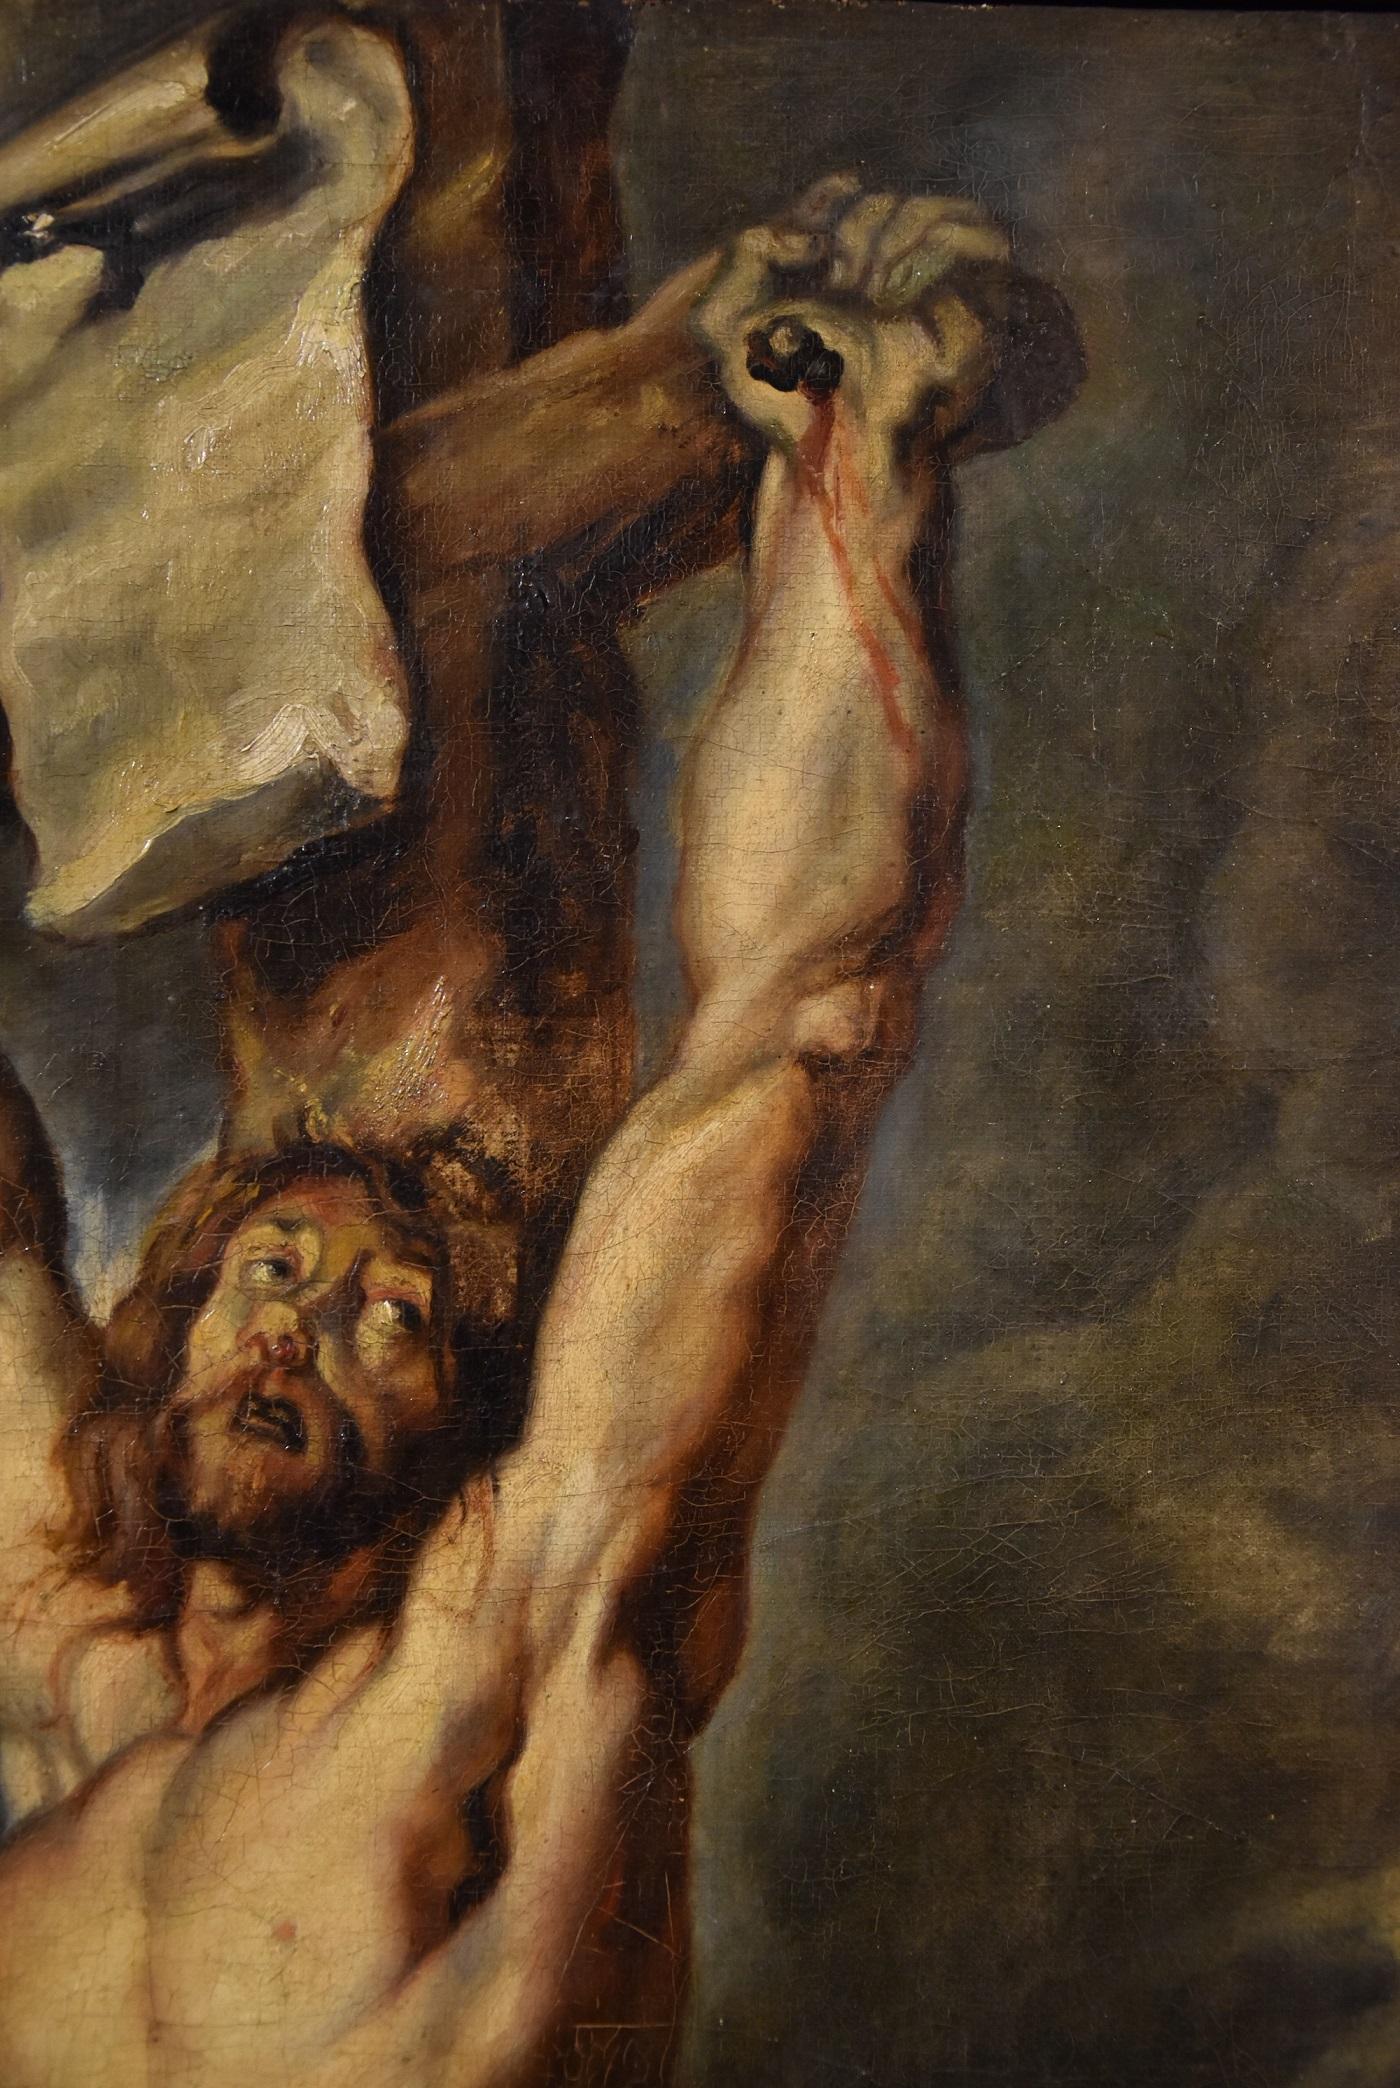 Christ Crucified Rubens Paint Oil on canvas Old master 17th Century Religious 4